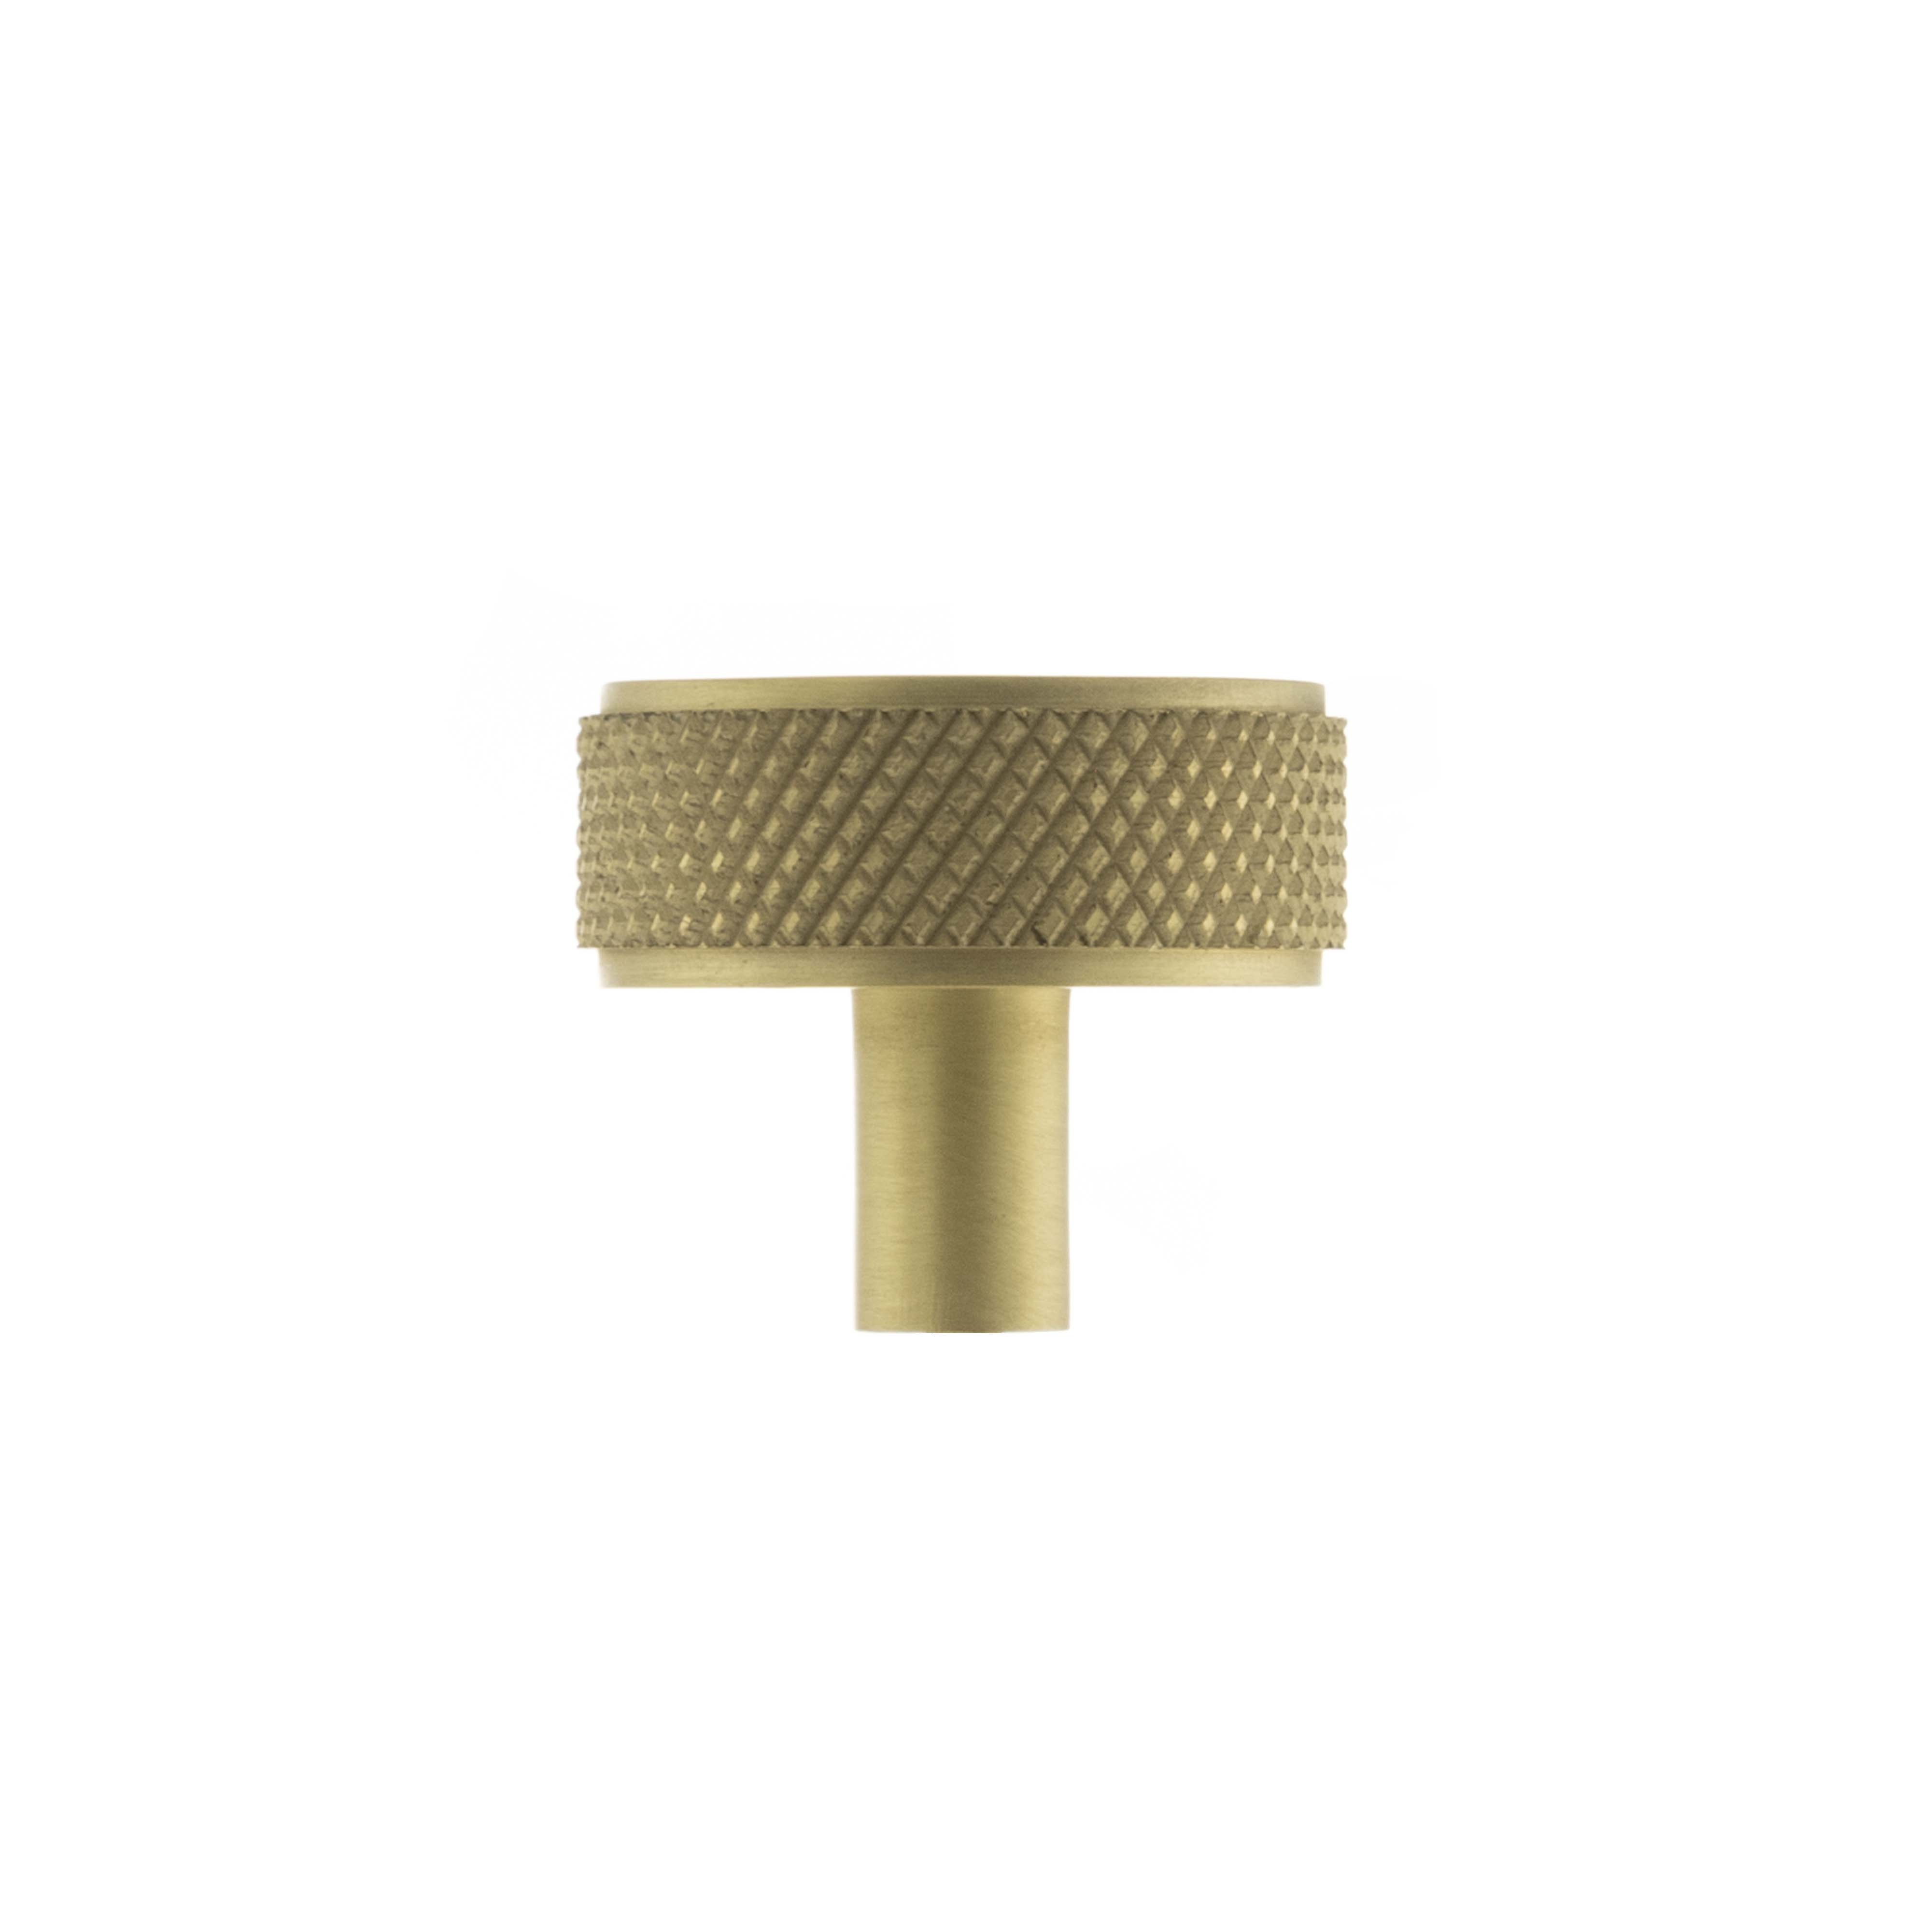 Millhouse Brass Hargreaves Disc Knurled Cabinet Knob on Concealed Fix - Satin Brass